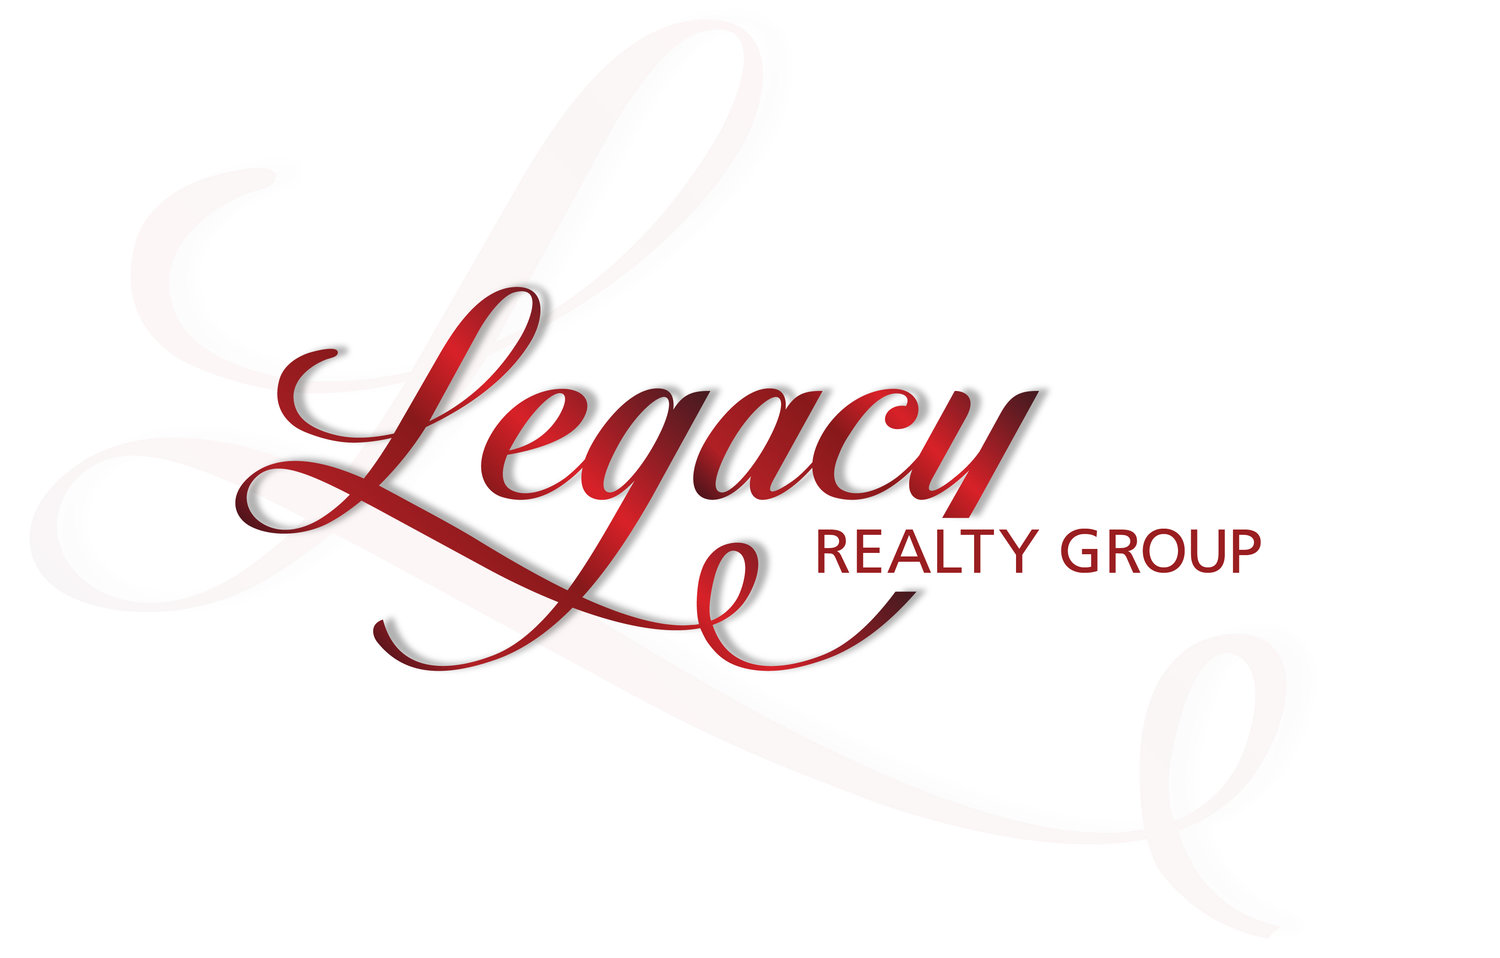 The Stevens Team with Legacy Realty Group